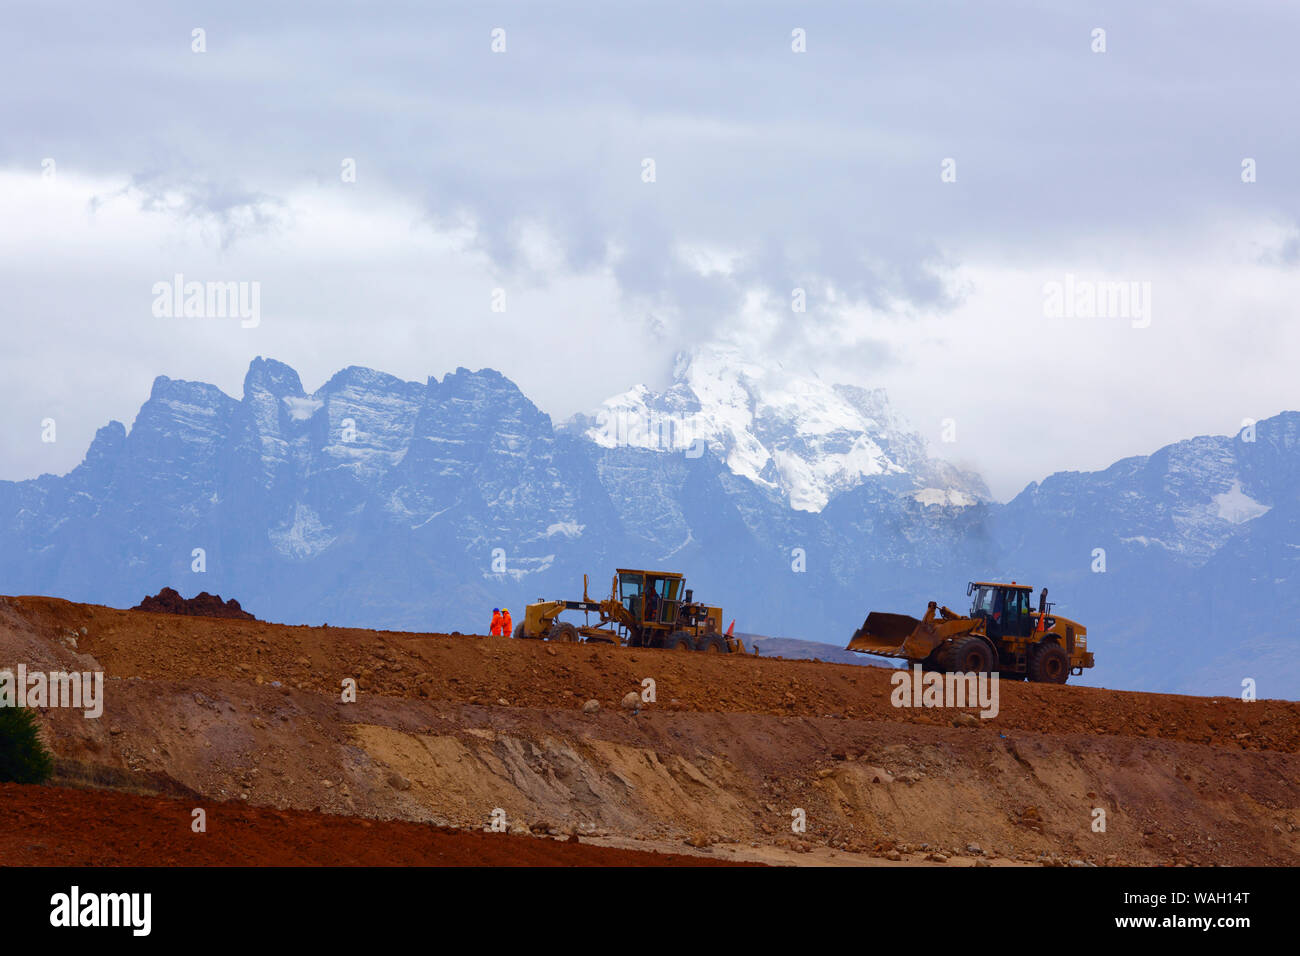 Heavy machinery working moving earth, the start of construction at the site of a new international airport at Chinchero for Cusco and Machu Picchu. In the background is Mt Sawasiray, one of the peaks of the Cordillera Urubamba mountain range. Cusco Region, Peru Stock Photo